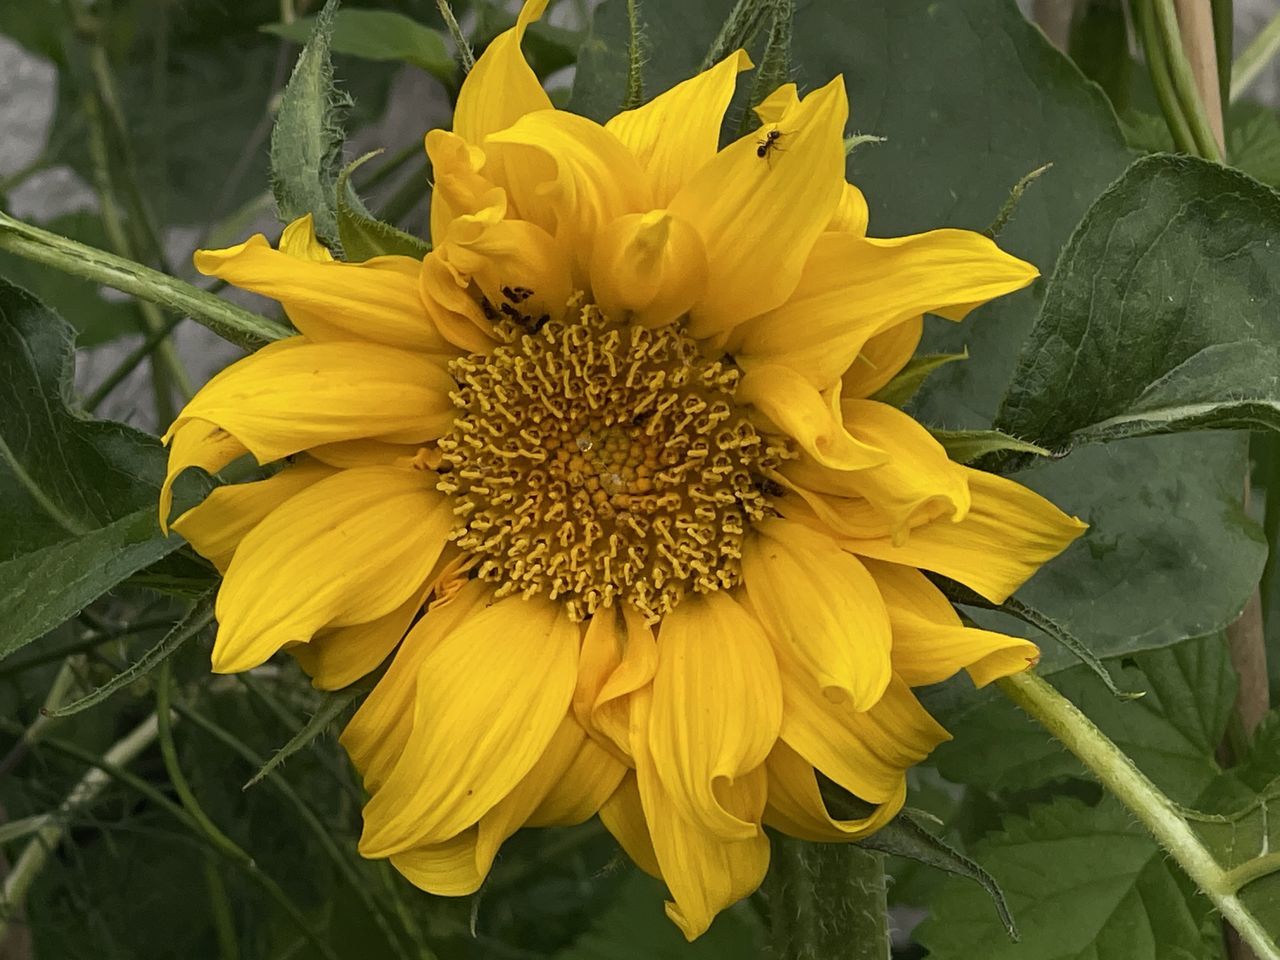 CLOSE-UP OF YELLOW FLOWER IN BLOOM